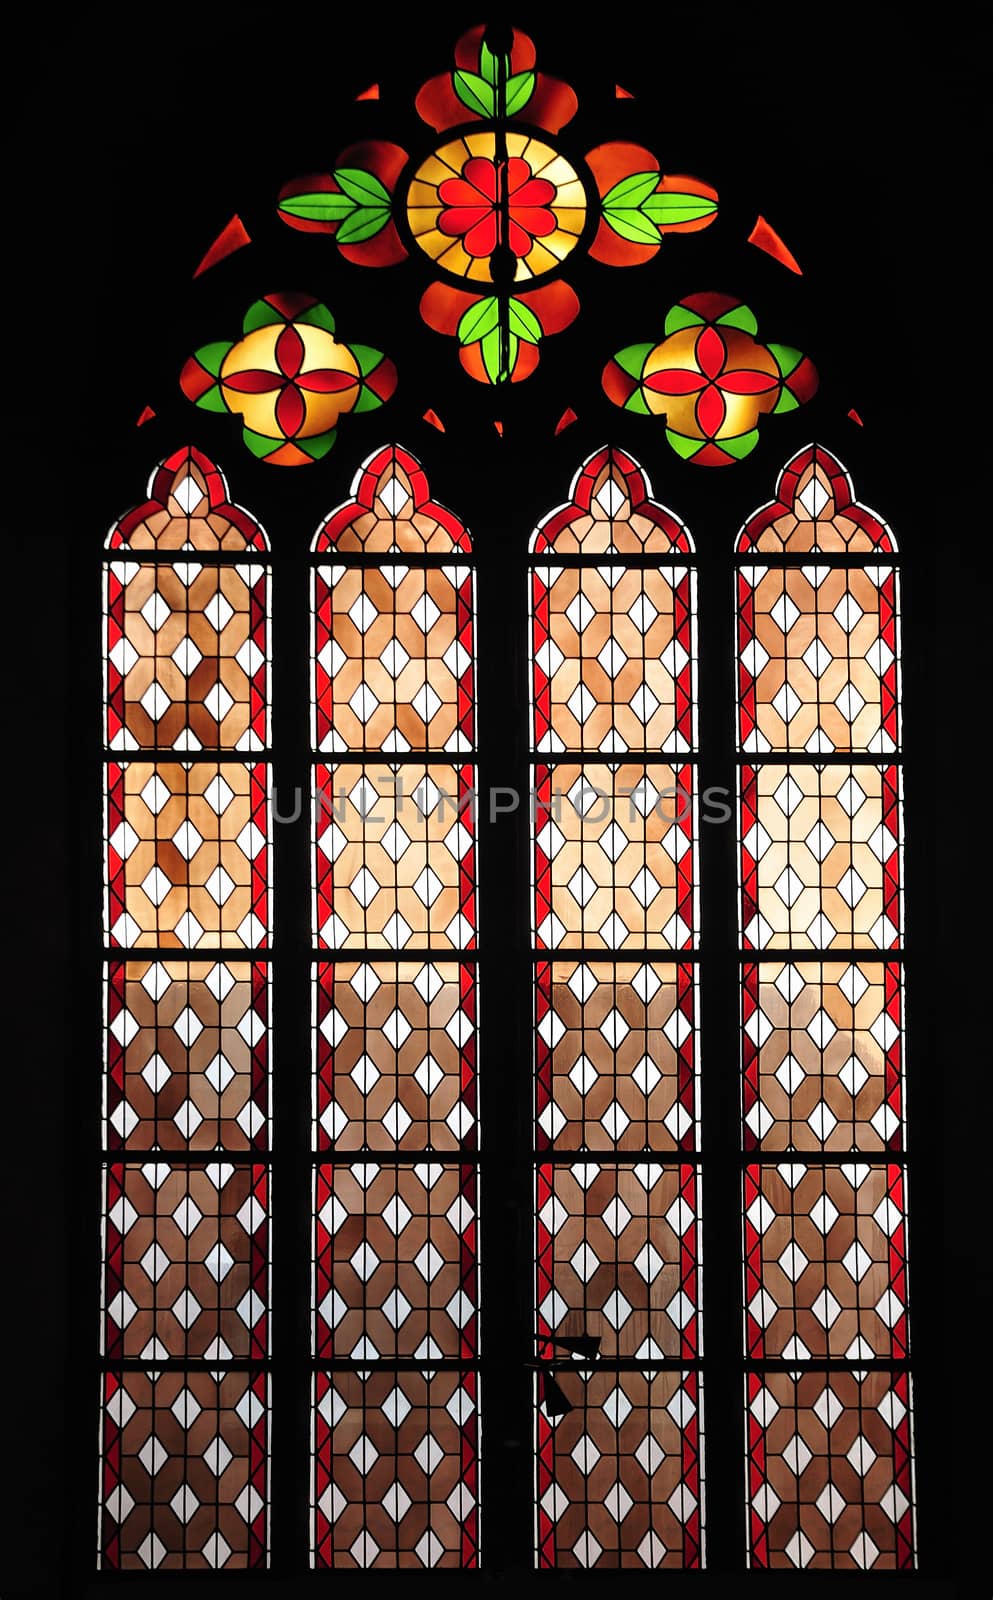 Old beautiful stained glass window in Visby cathedral.
Visby cathedral. restored around 1900, under the leadership of the Gotland born architect and artist Axel Herman Hägg. At the recent renovation of the cathedral made ​​new glass windows in the Great Chapel. The artist named Pär Andersson.